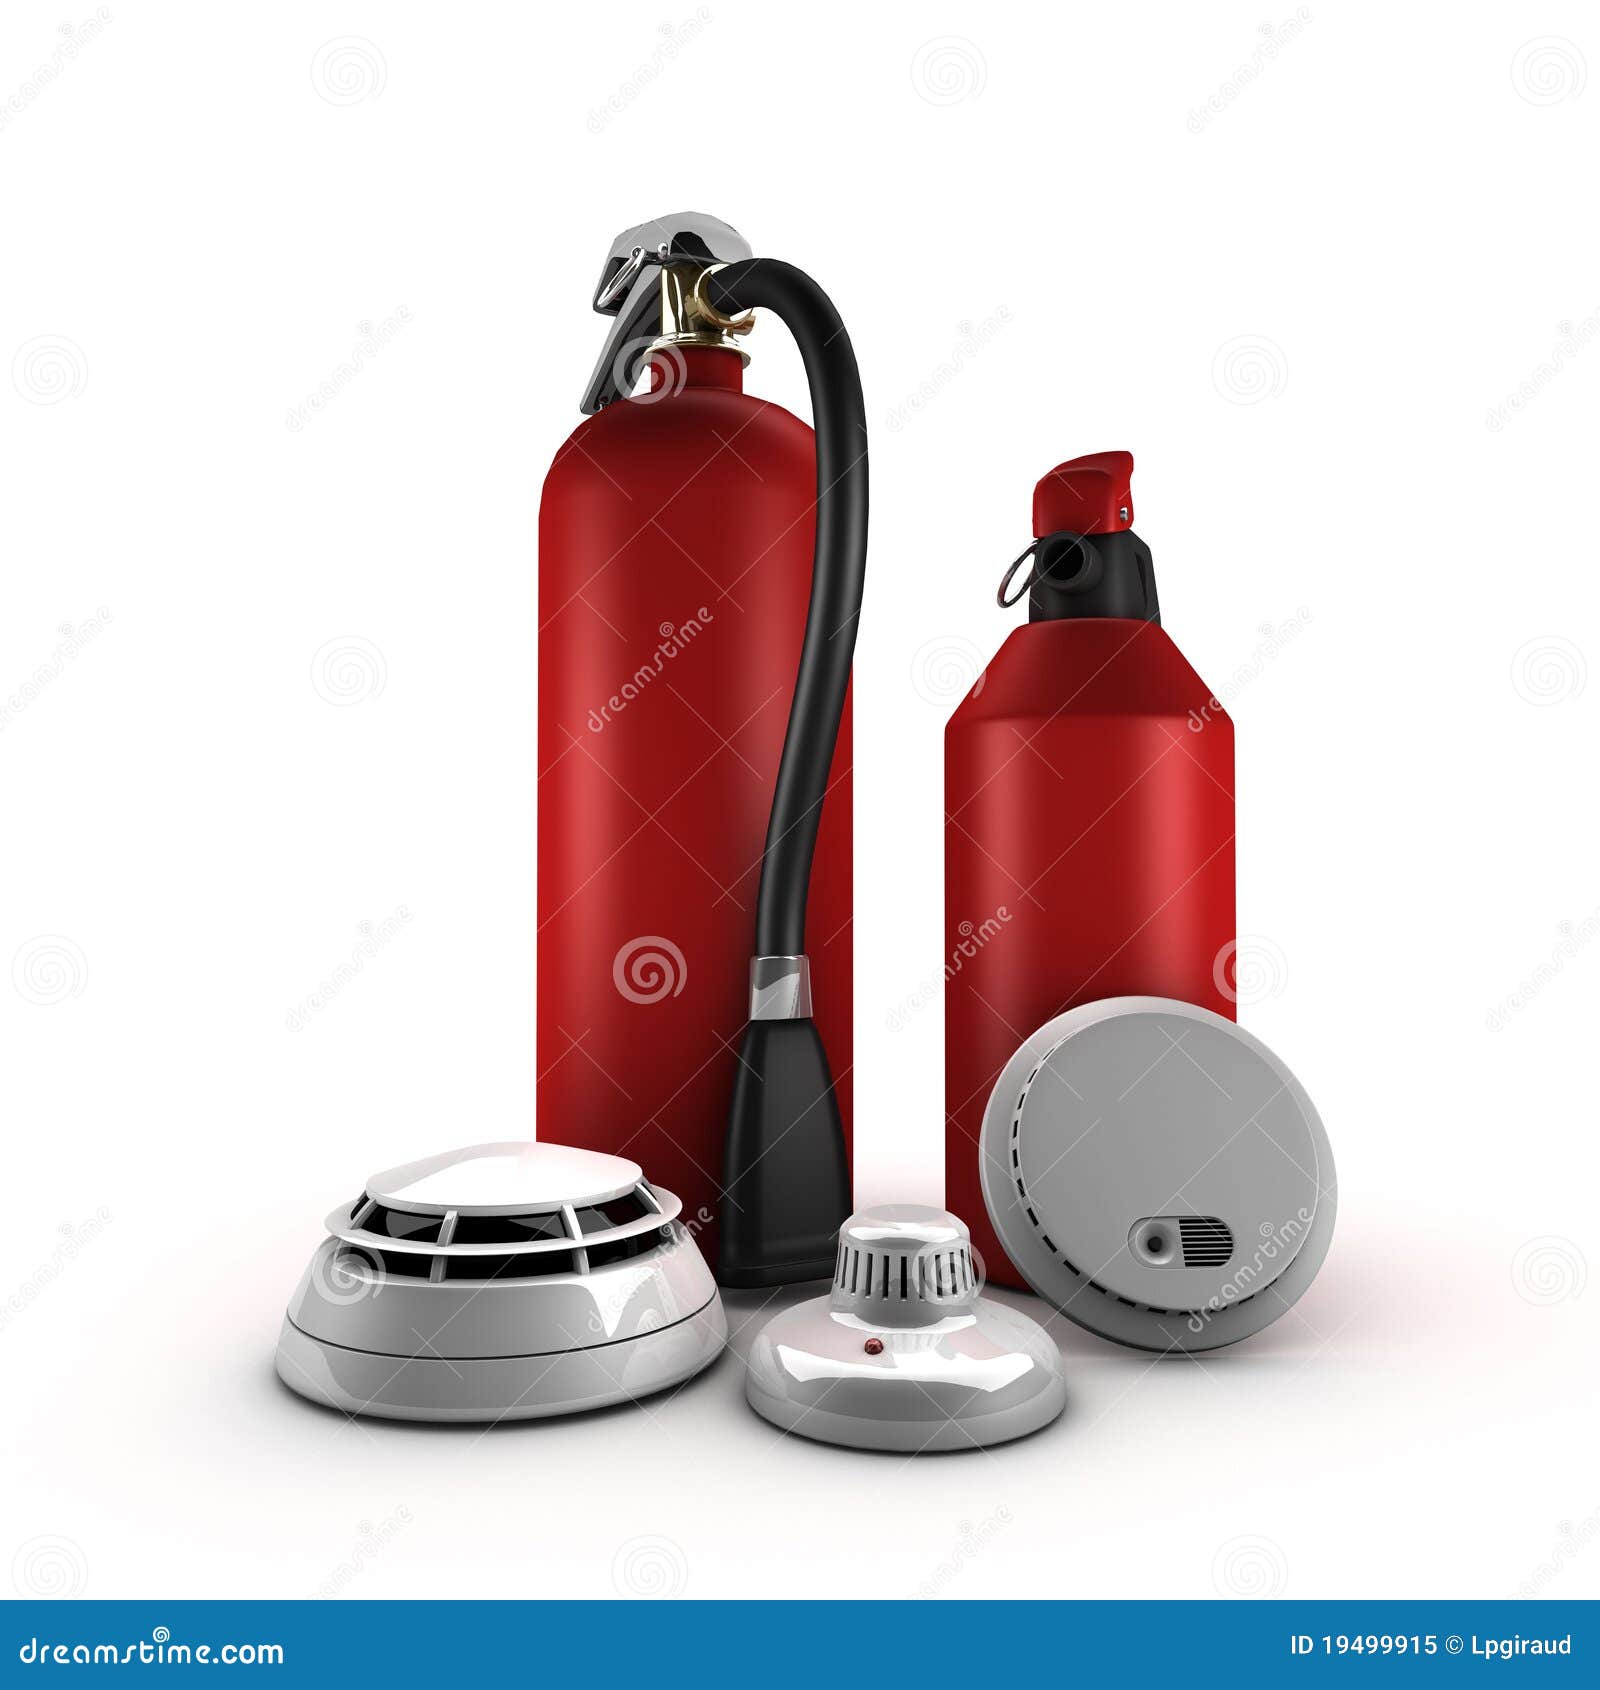 extinguisher and fire detection